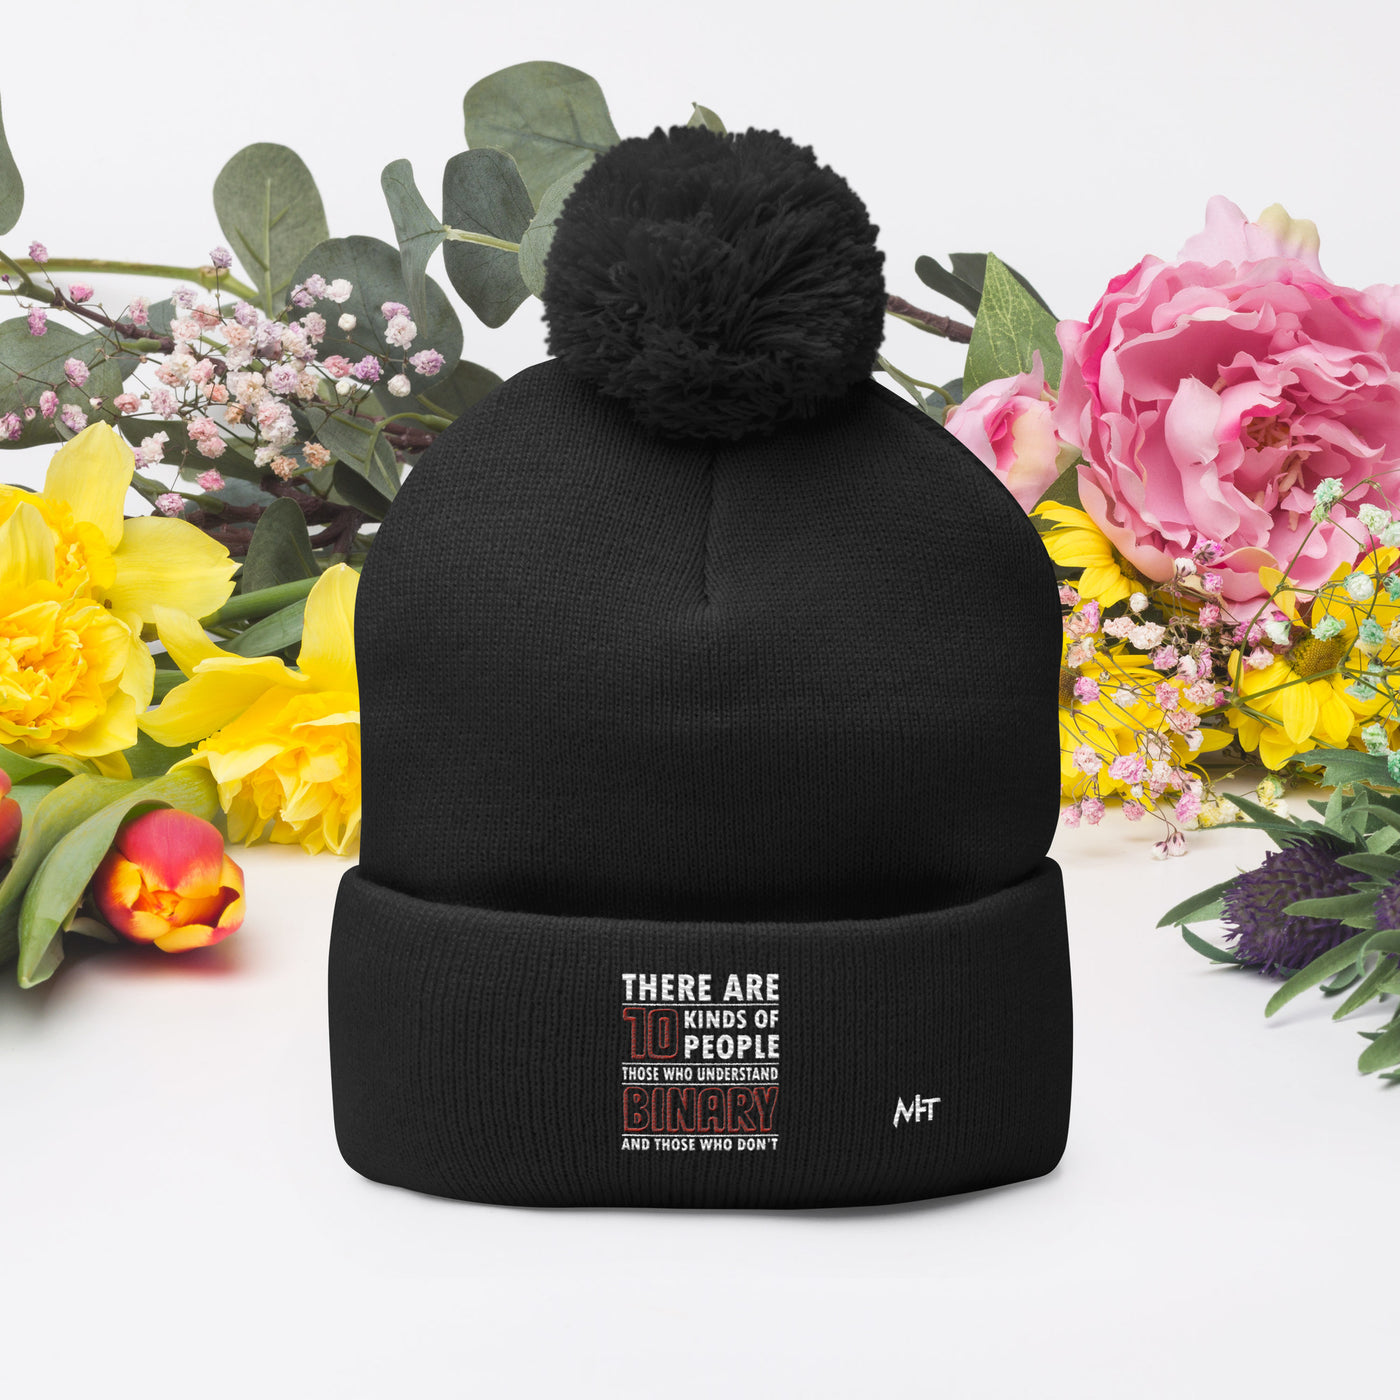 There are 10 kinds of People - Pom-Pom Beanie